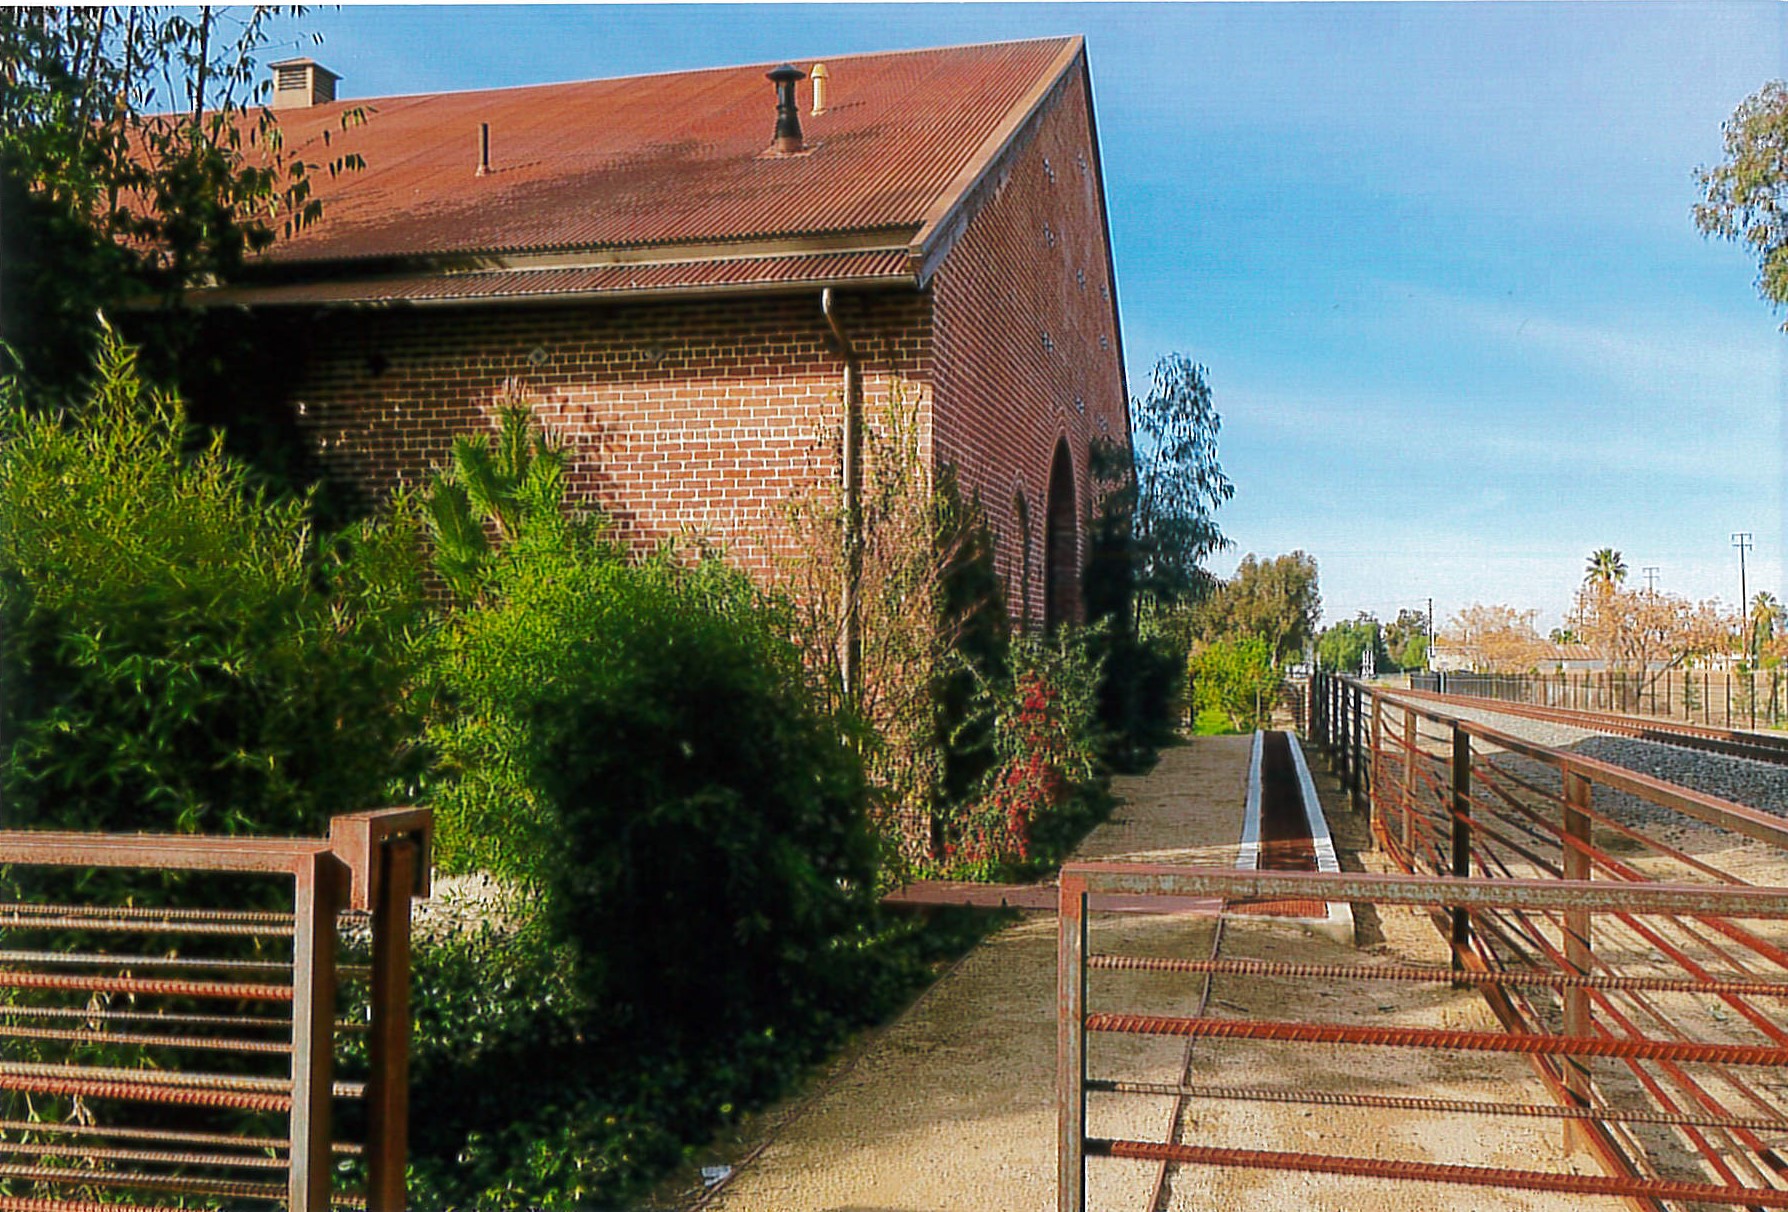 North and east facades, new pedestrian pathway and railing, railroad tracks 